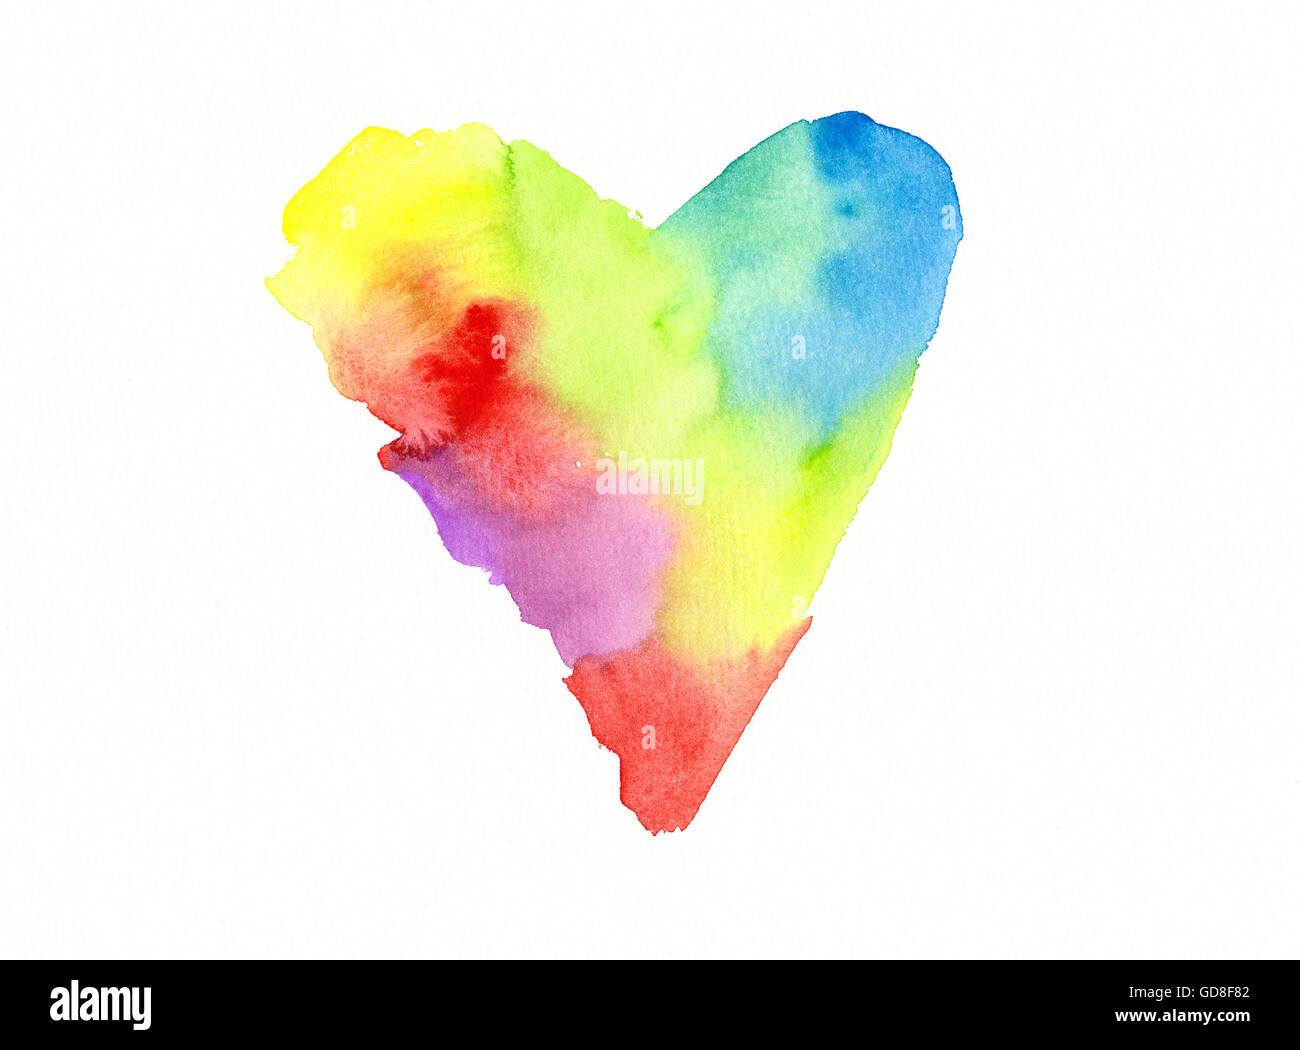 Rainbow colored heart watercolor painting Stock Photo